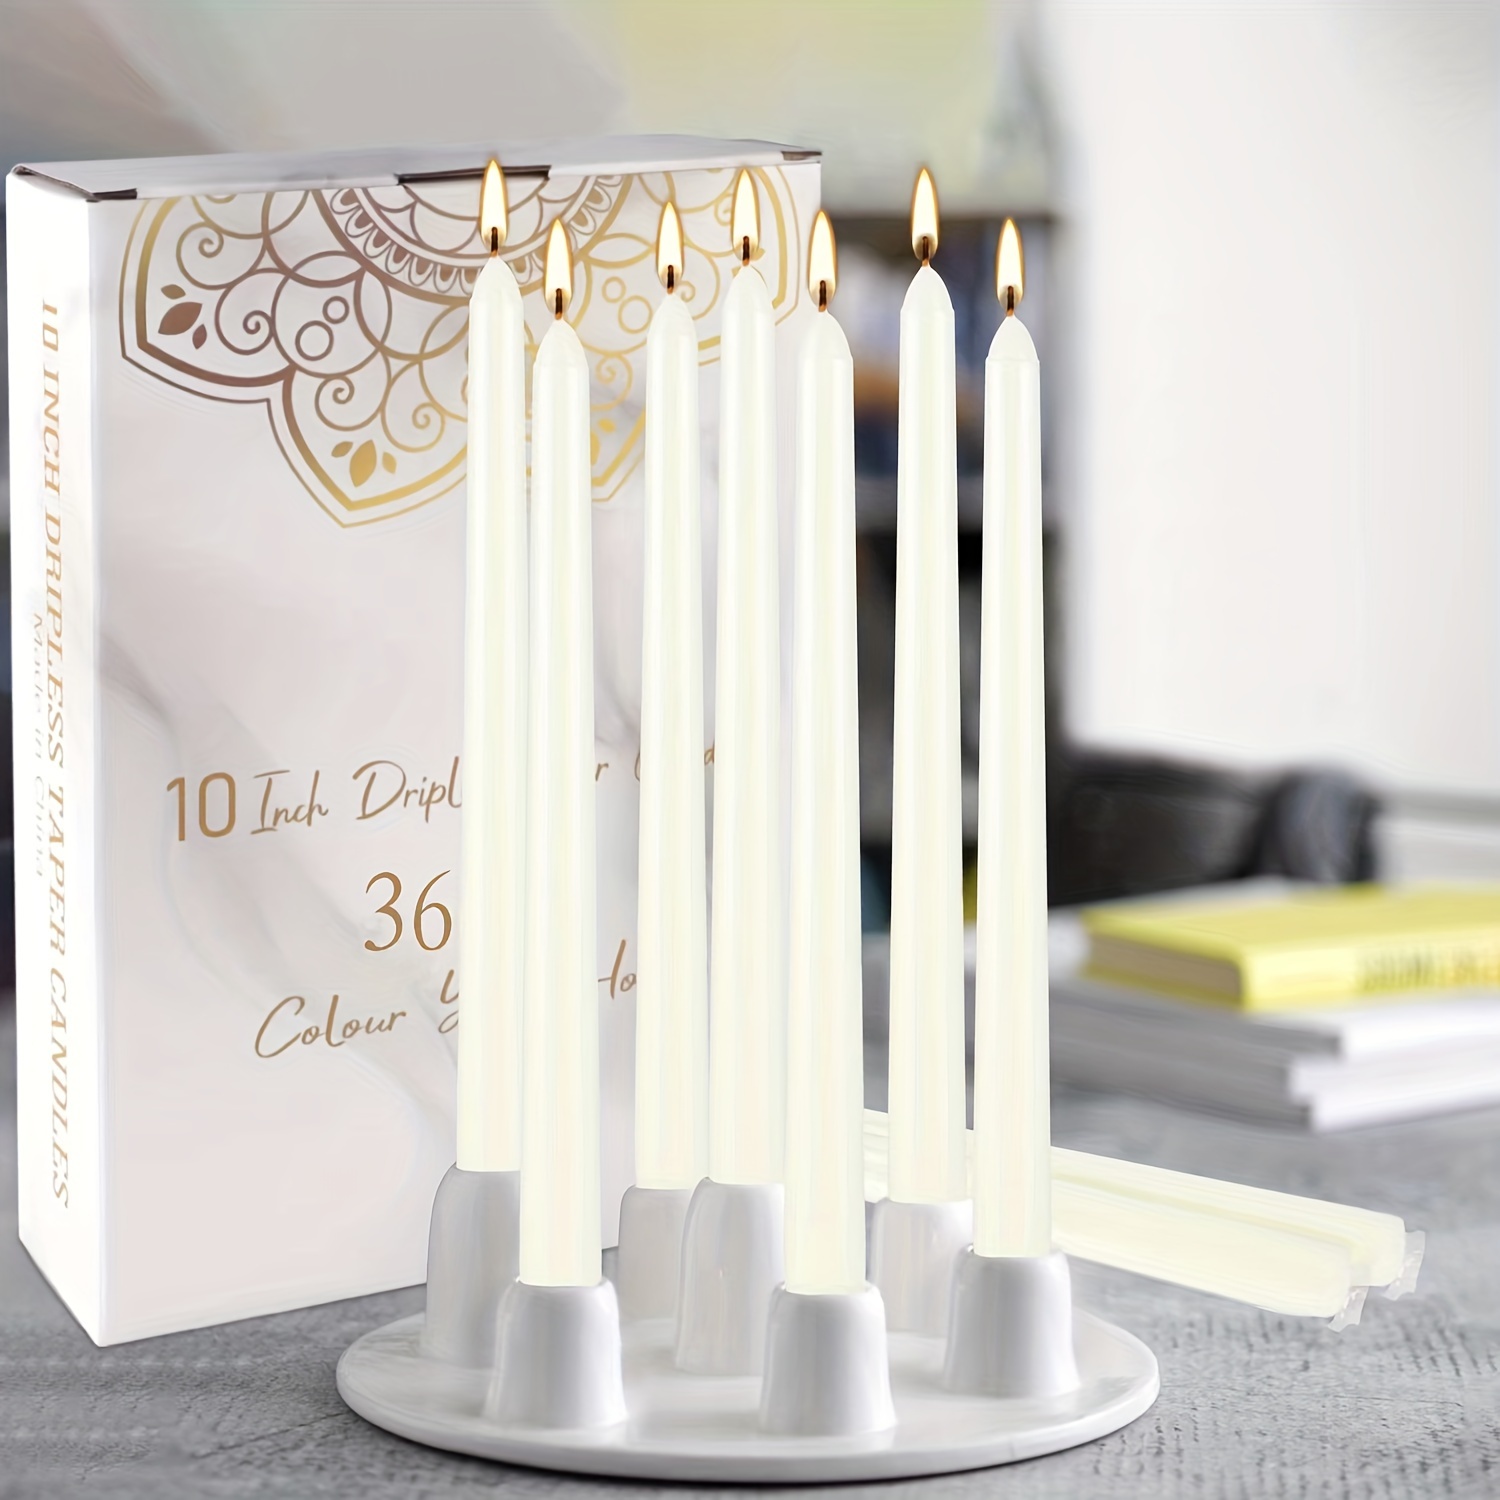 

36 Festive Candles With Pole Wax And Ivory White As Decorative Items